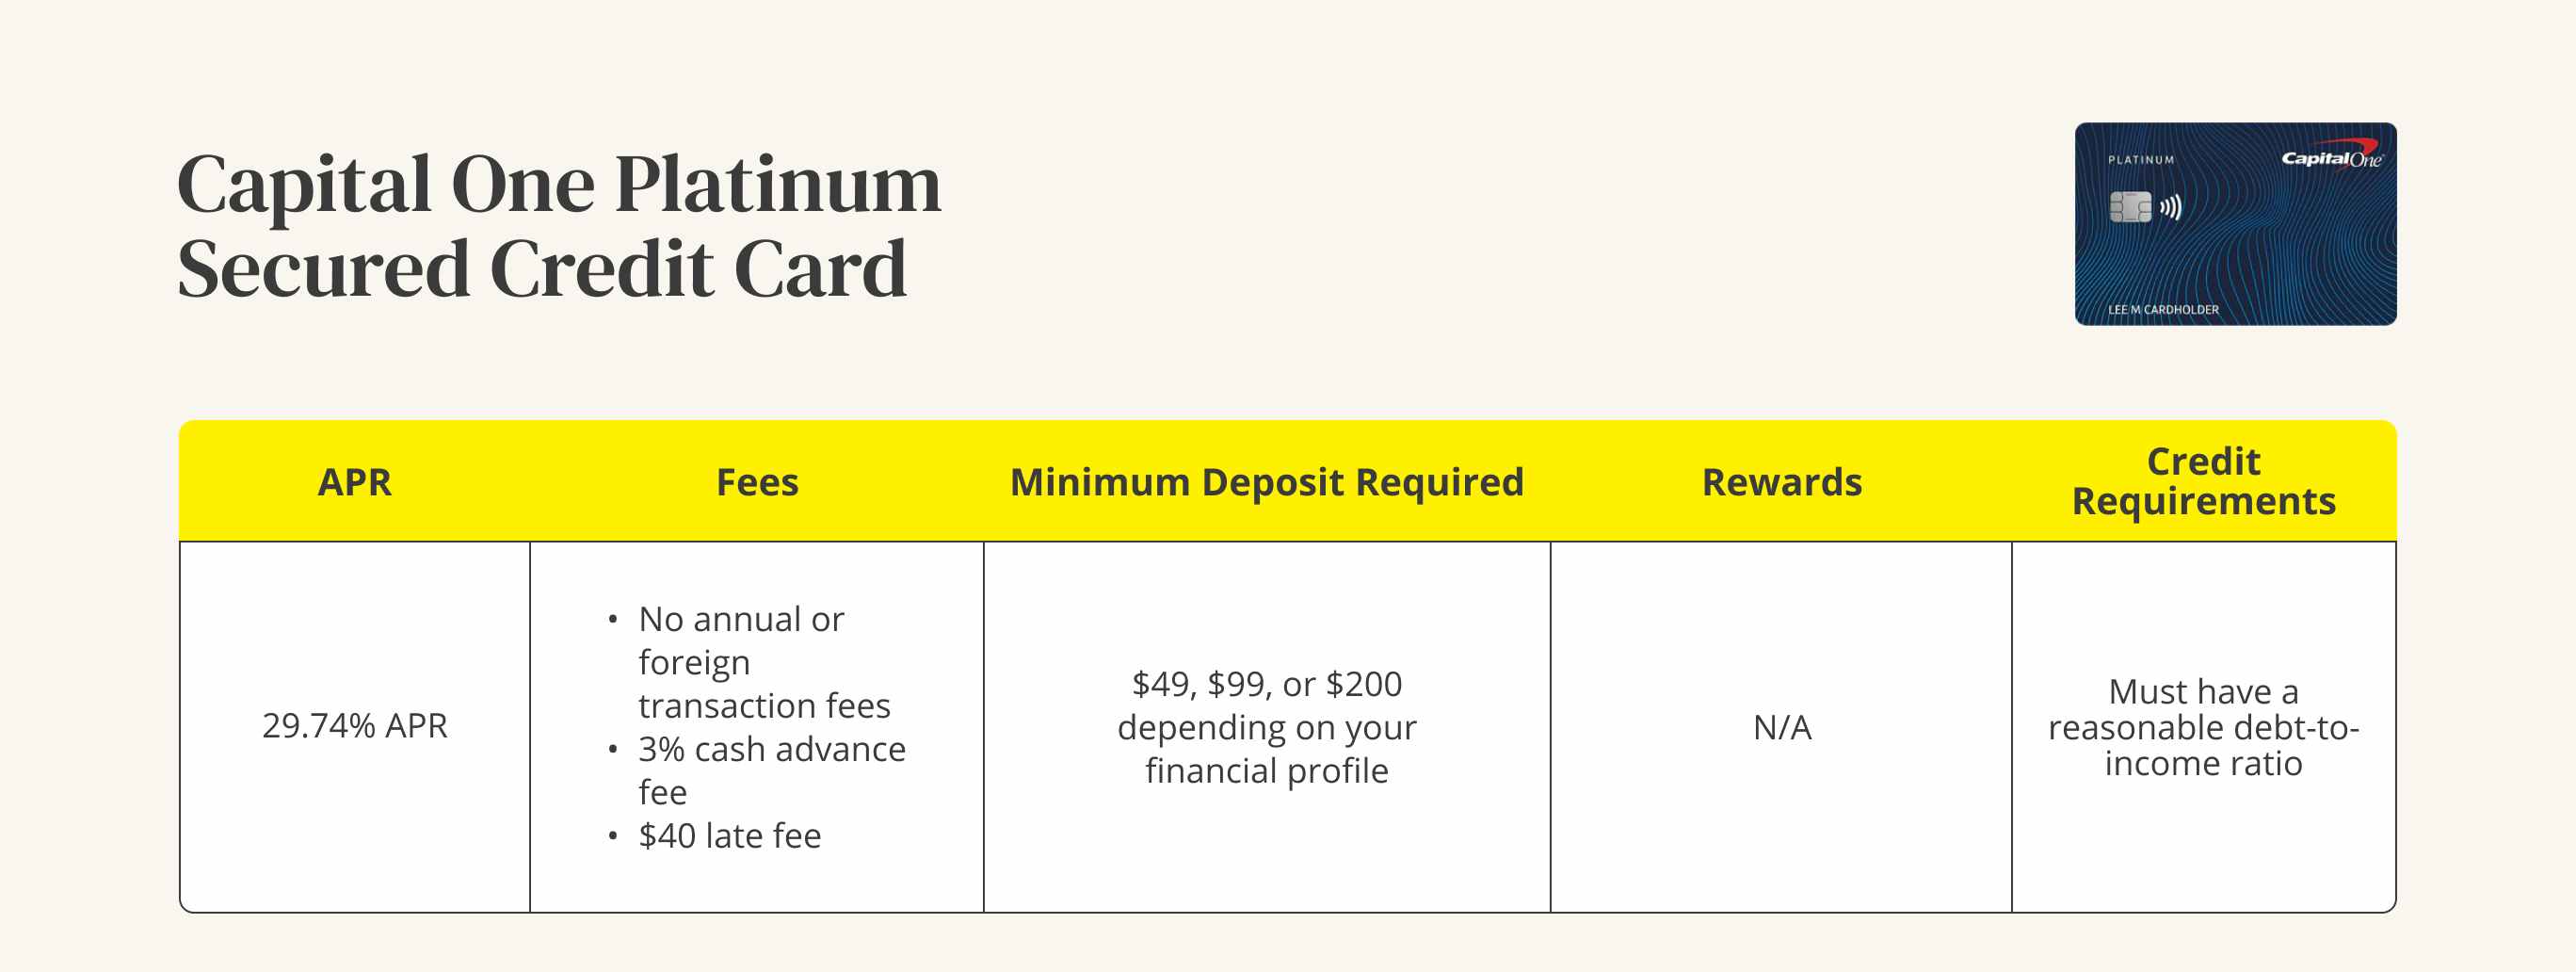 A graphic showing the APR, fees, minimum deposit, rewards, and credit requirements for a Capital One Platinum Secured credit card